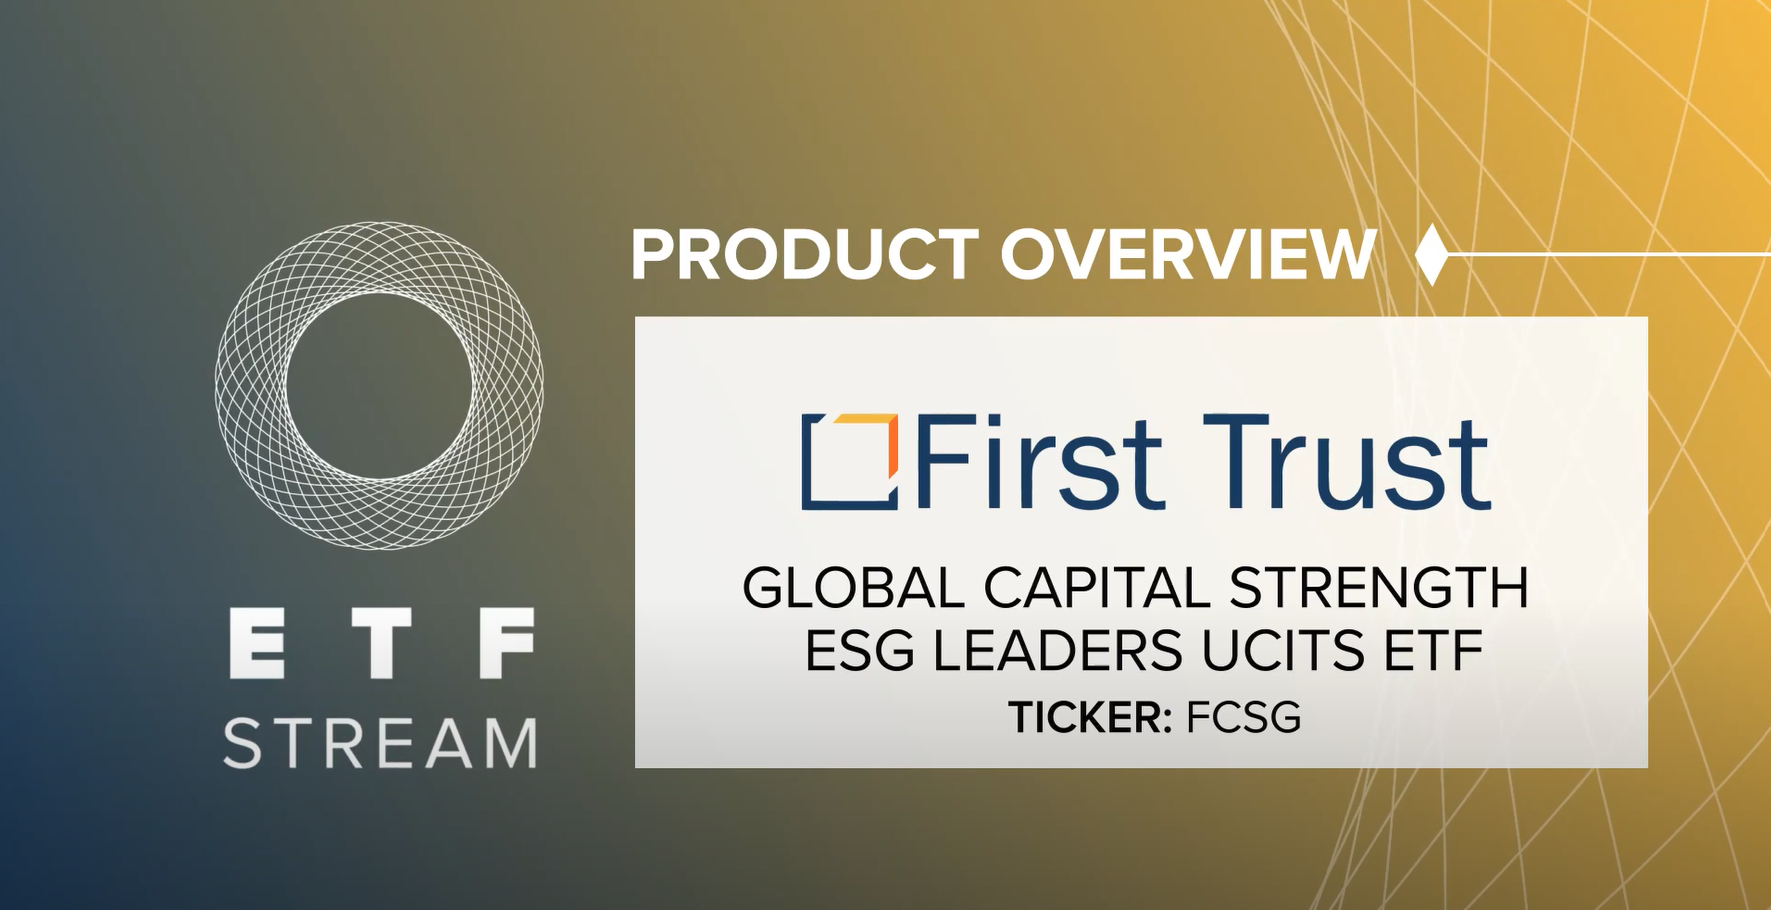 Fund Overview - First Trust Global Capital Strength ESG Leaders UCITS ETF